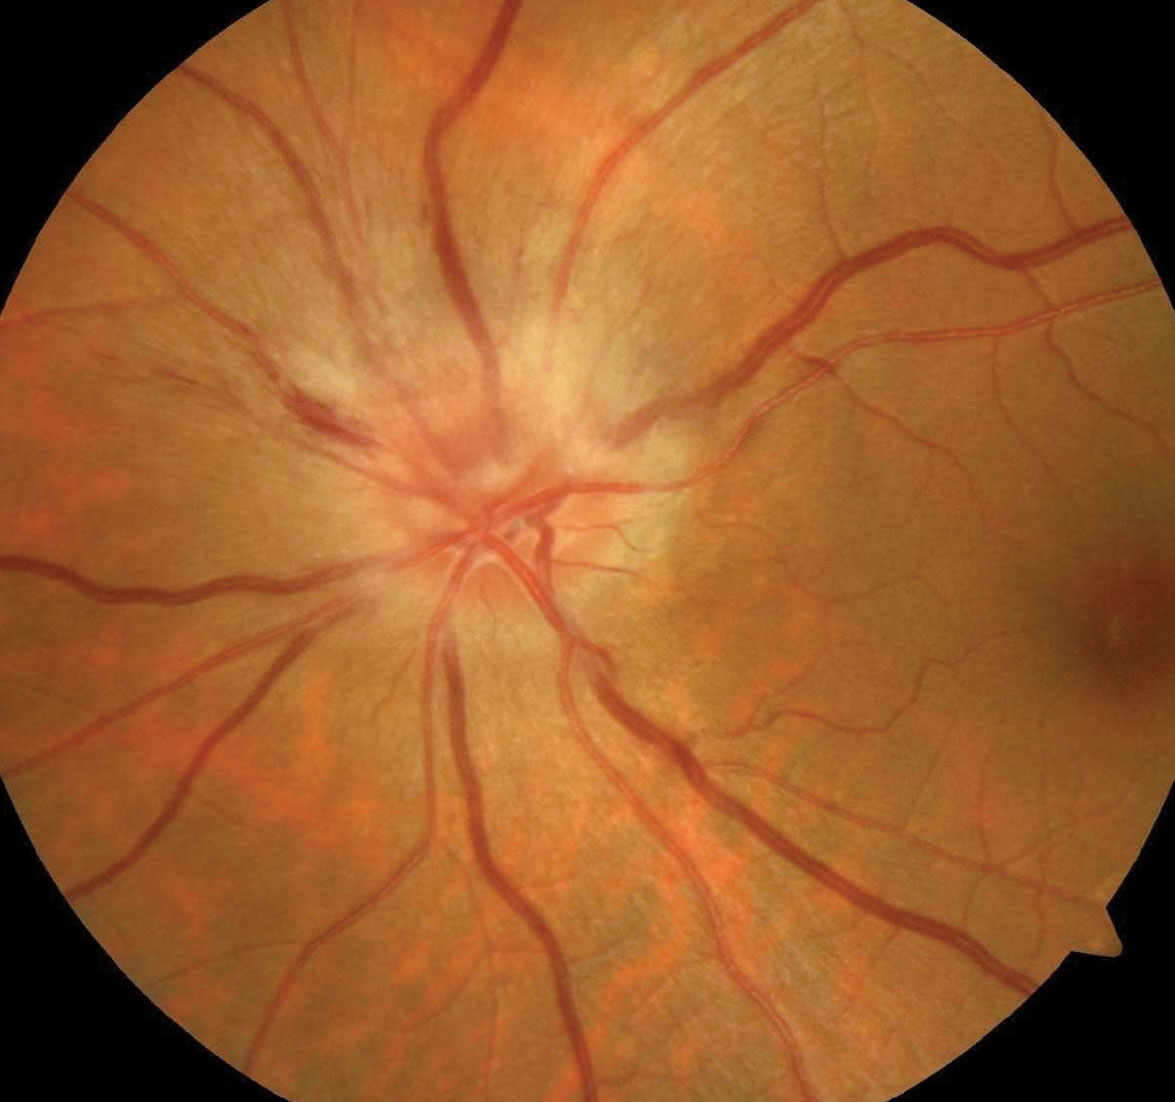 Although the pathogenesis of both conditions still needs to be investigated, a recent literature review found that PCSON or NAION may increase the risk of PCSON in the fellow eye.